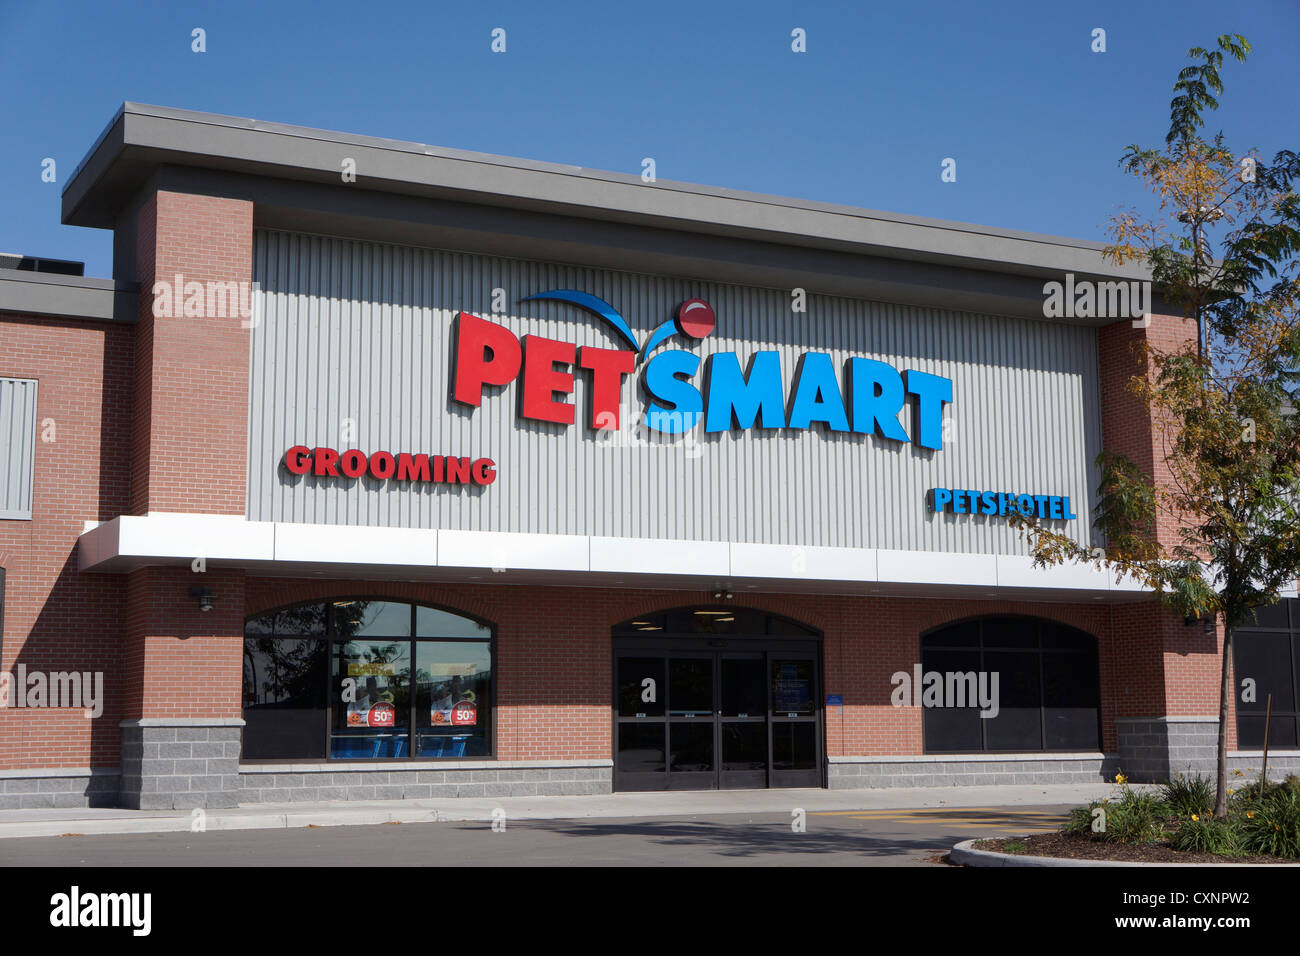 Petsmart, Pet supplies, products store & Grooming Stock Photo